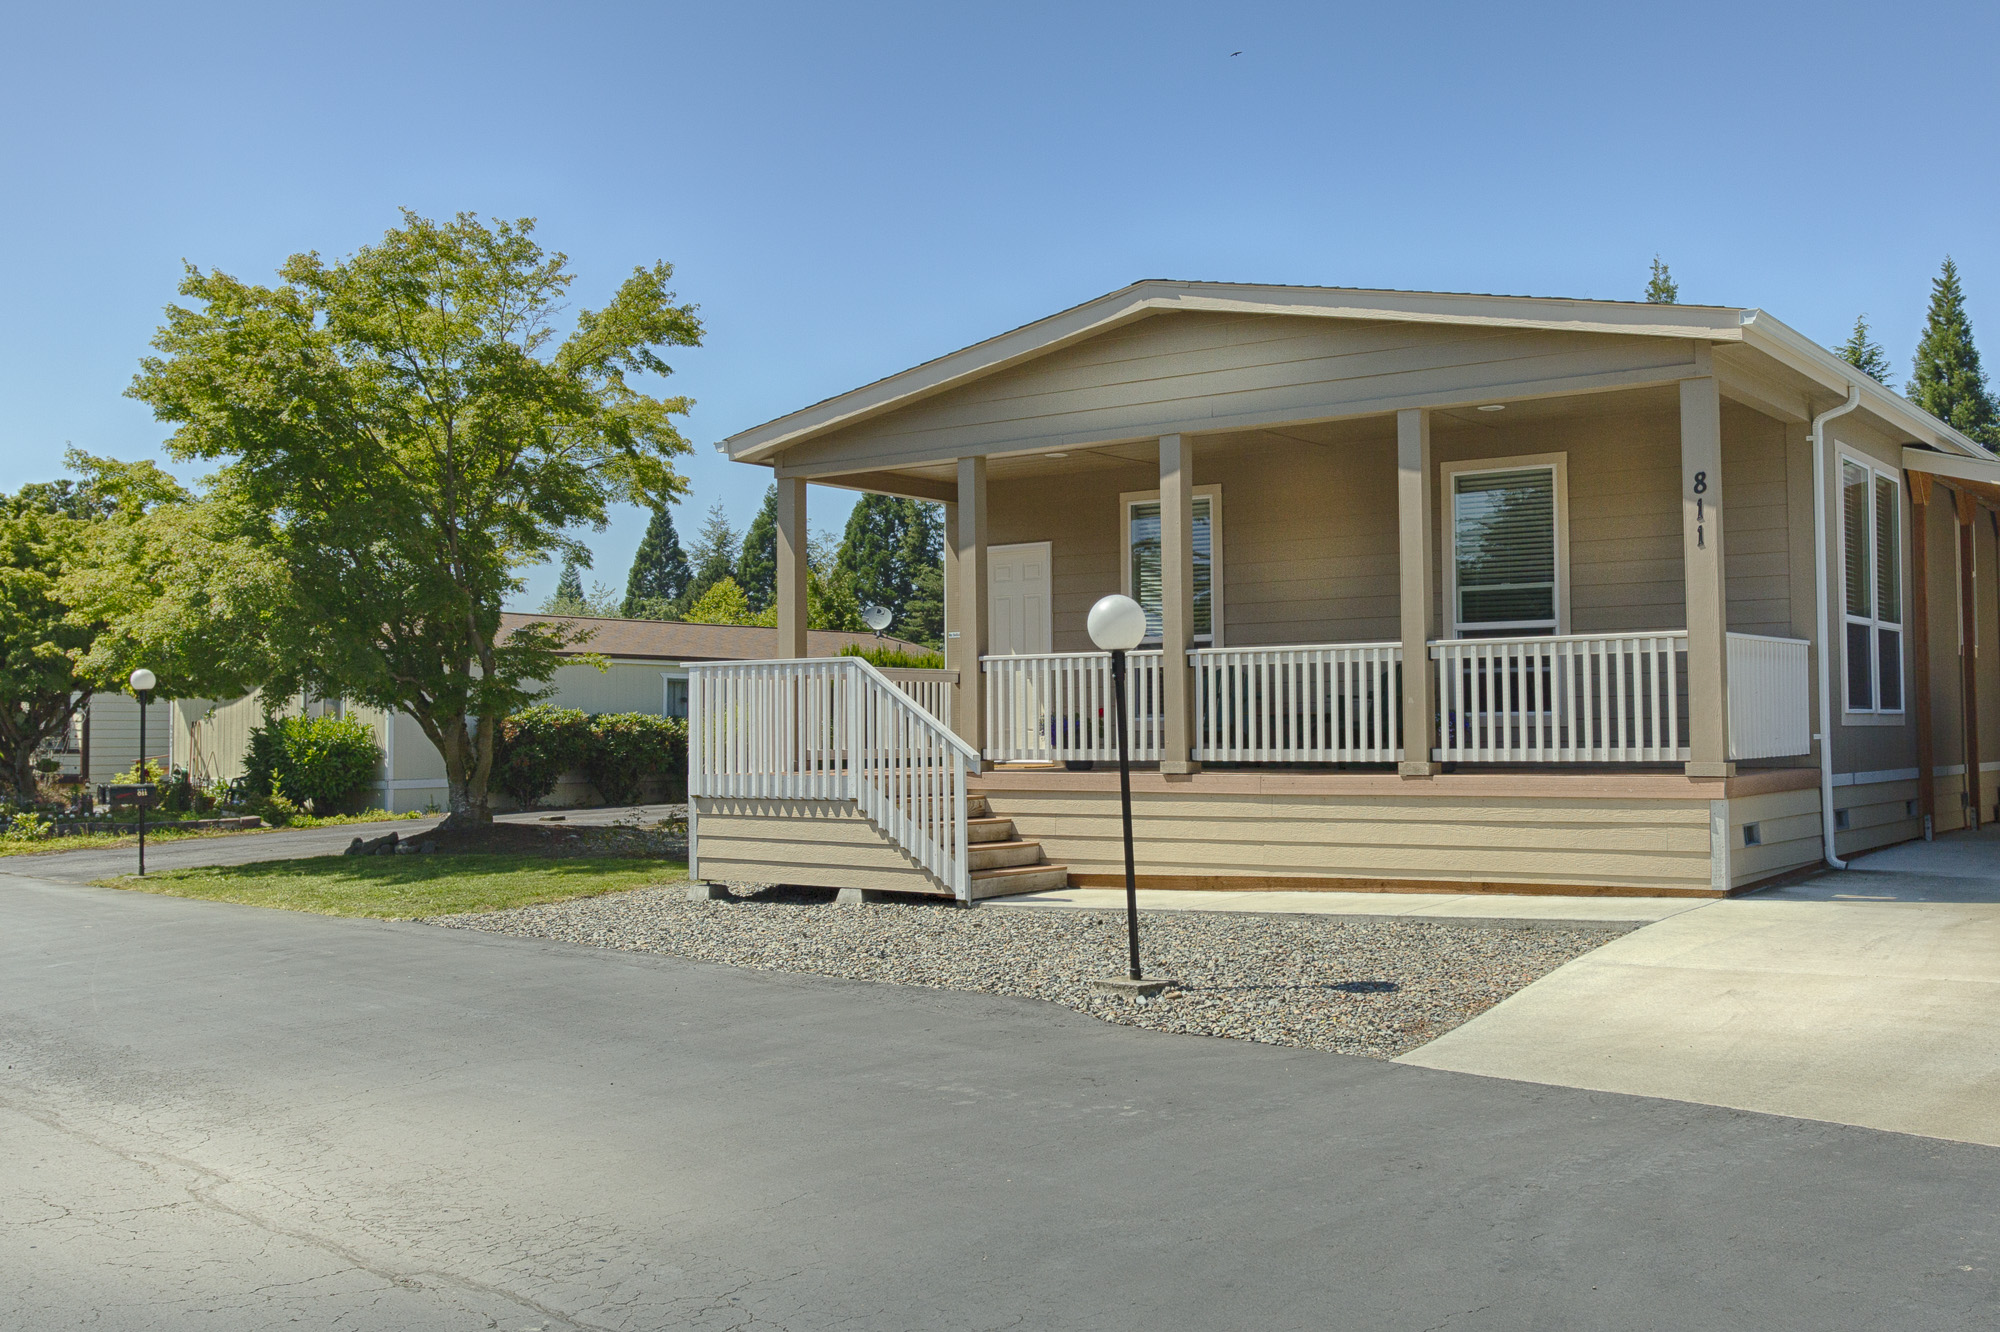 Beige colored manufactured home with small staircase leading up to long covered front porch. Very well-maintained front landscape for a clean look.